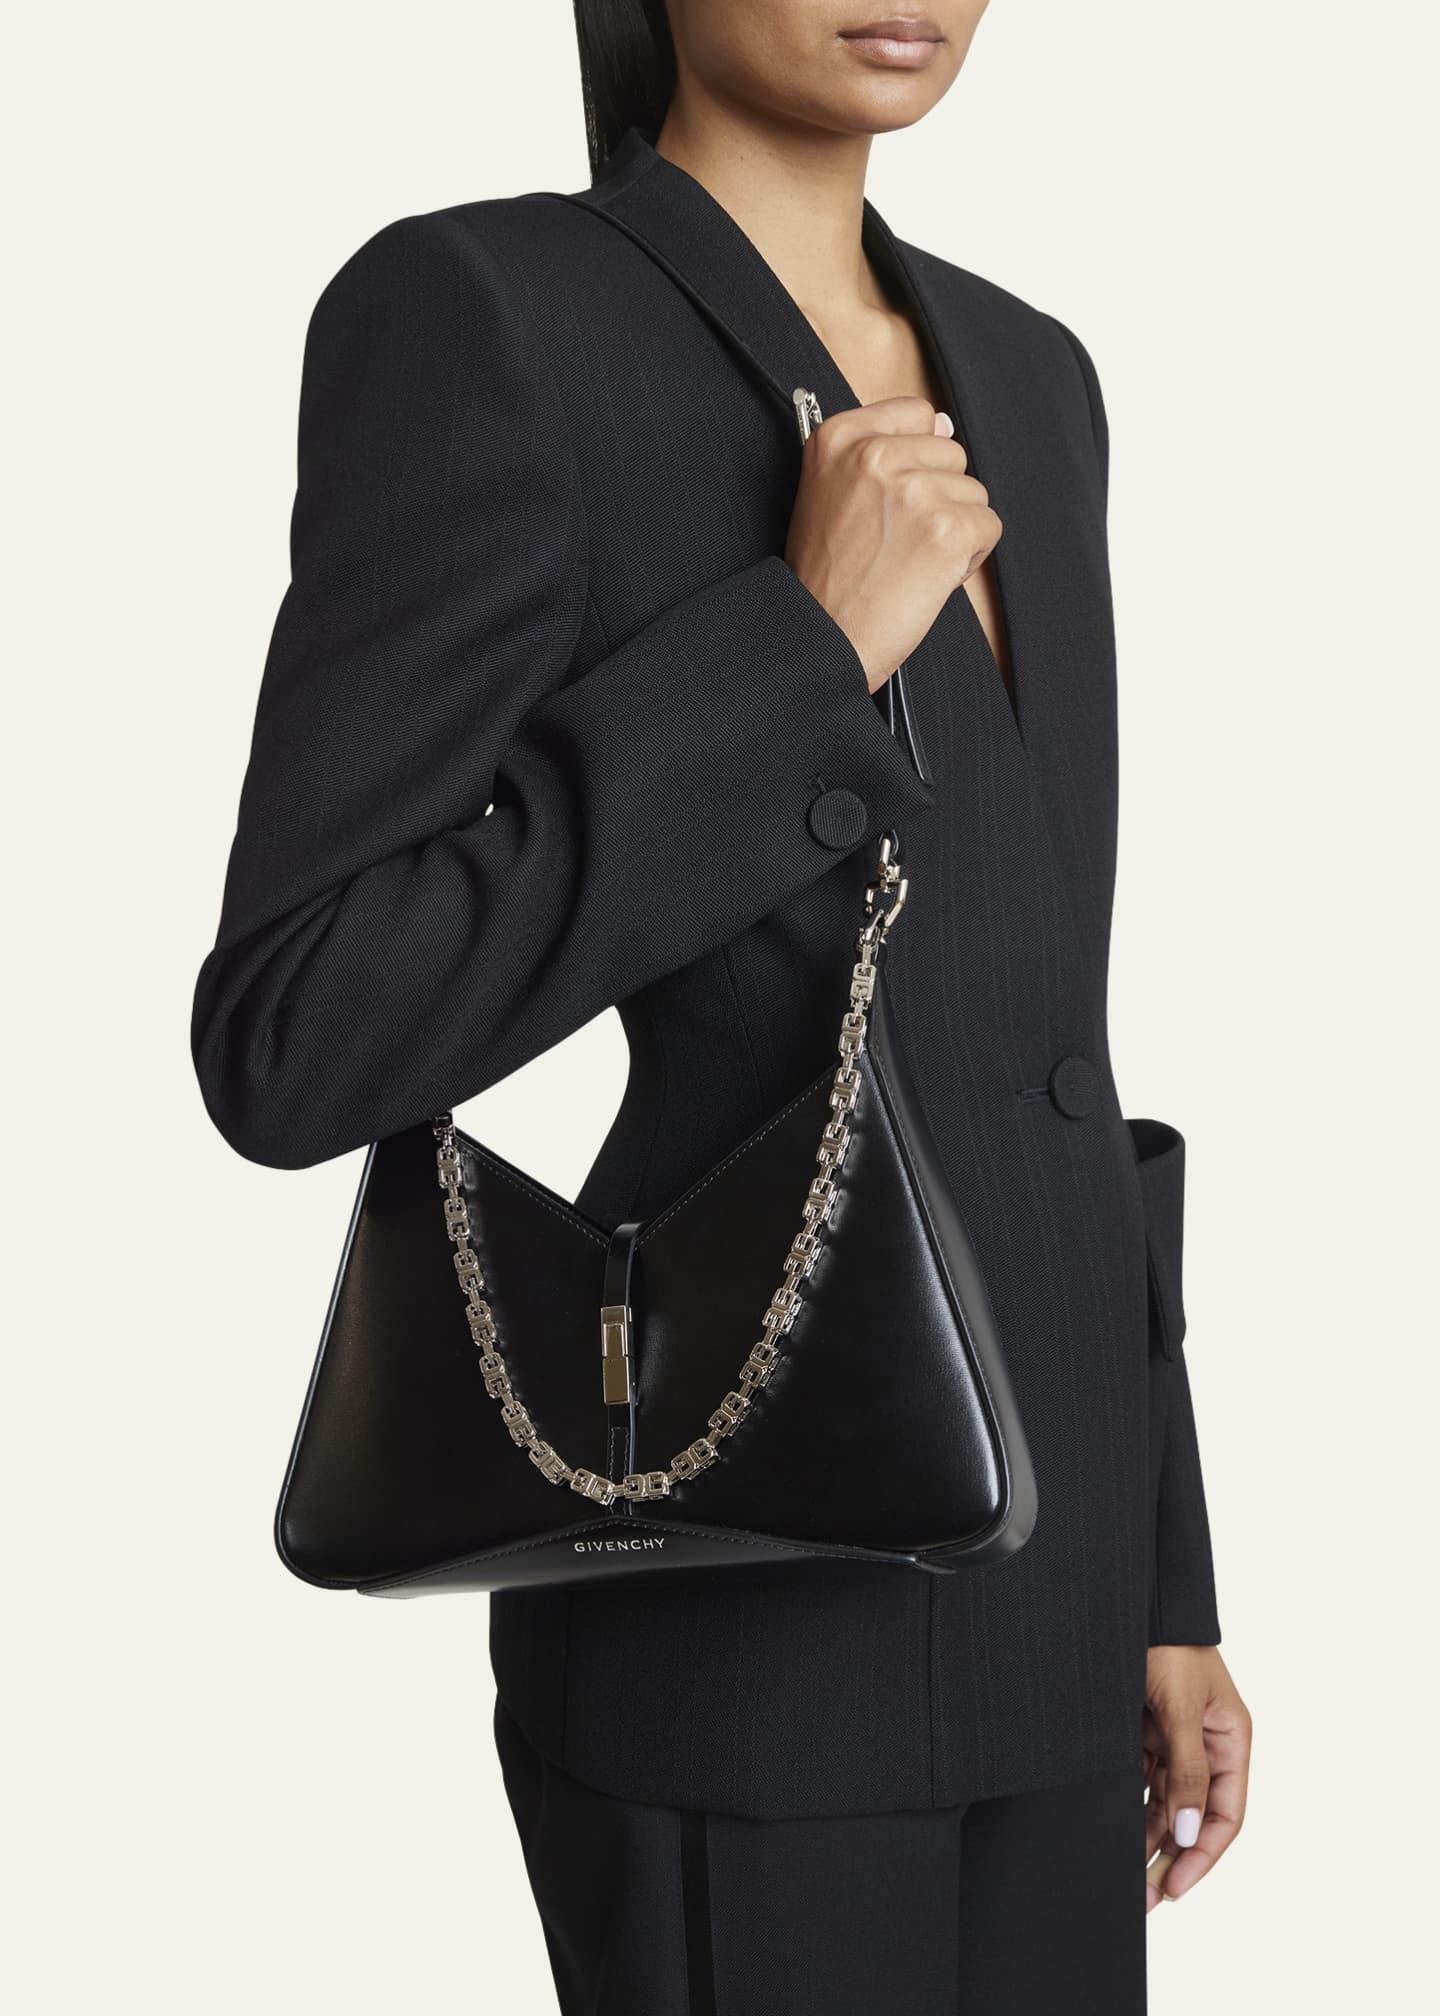 Givenchy Small Cutout Zip Shoulder Bag in Leather - Bergdorf Goodman